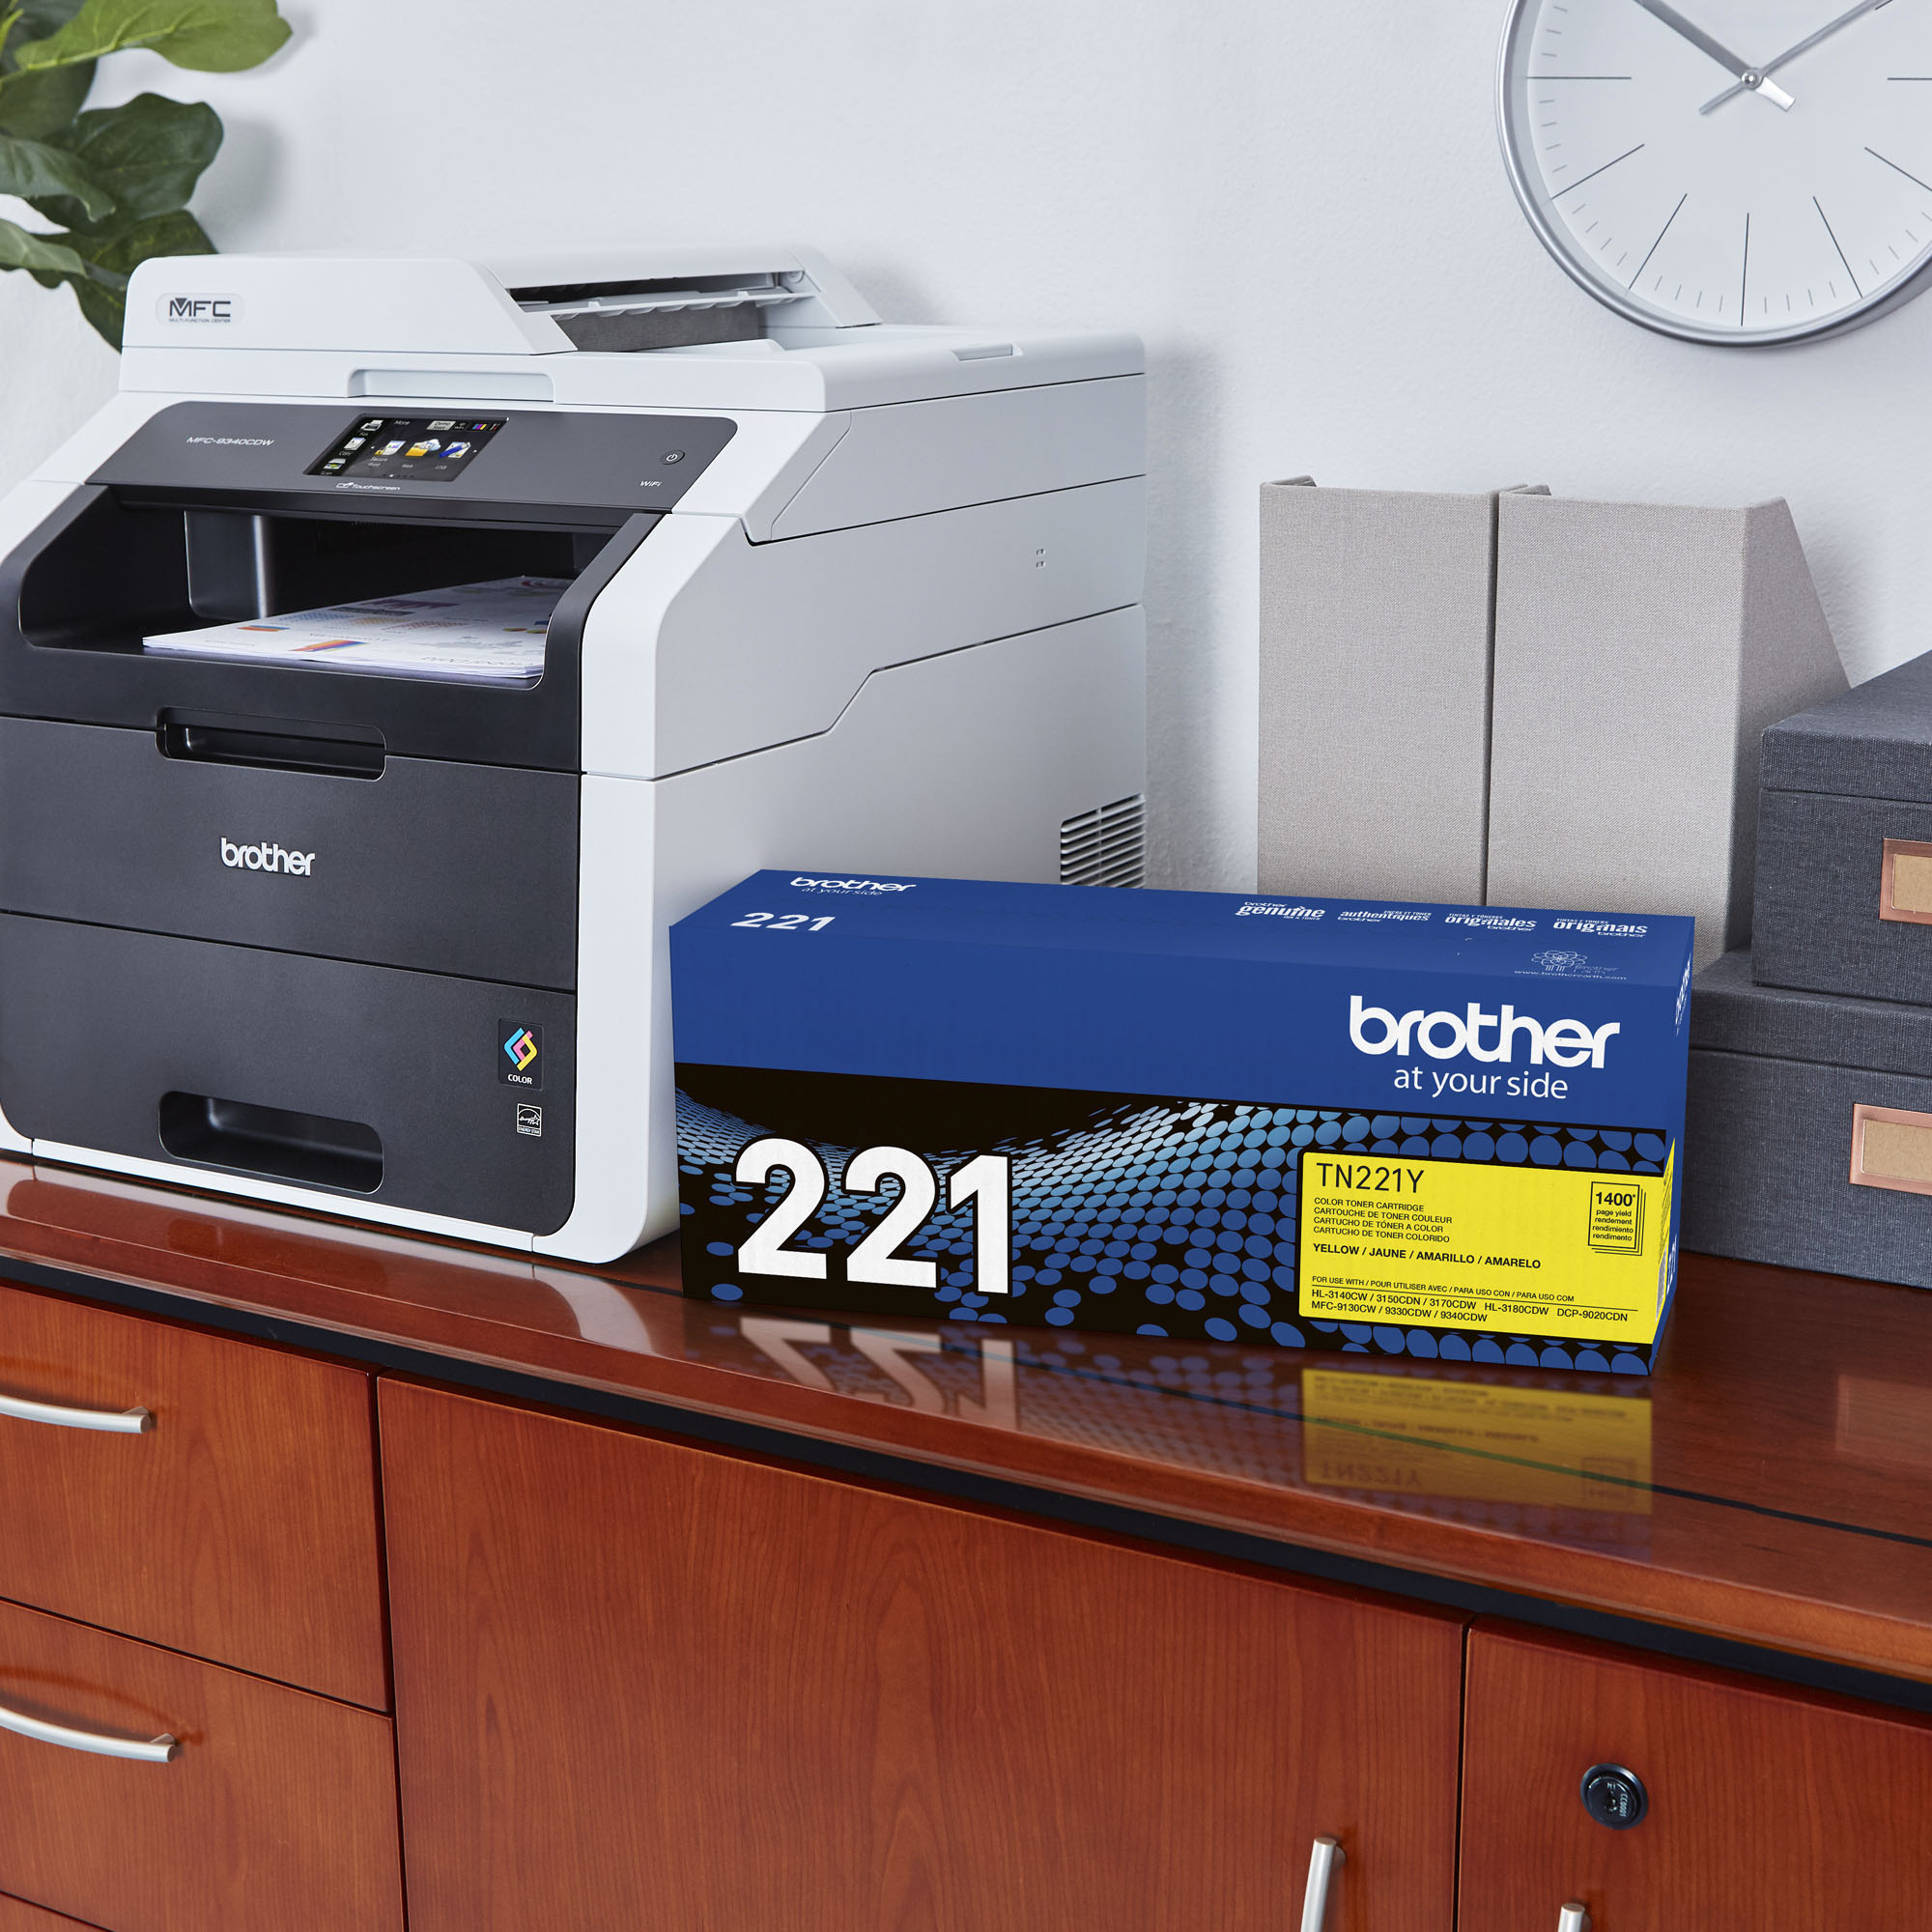 Best Buy: Brother MFC-9340CDW Wireless Color All In One Printer MFC-9340CDW -US